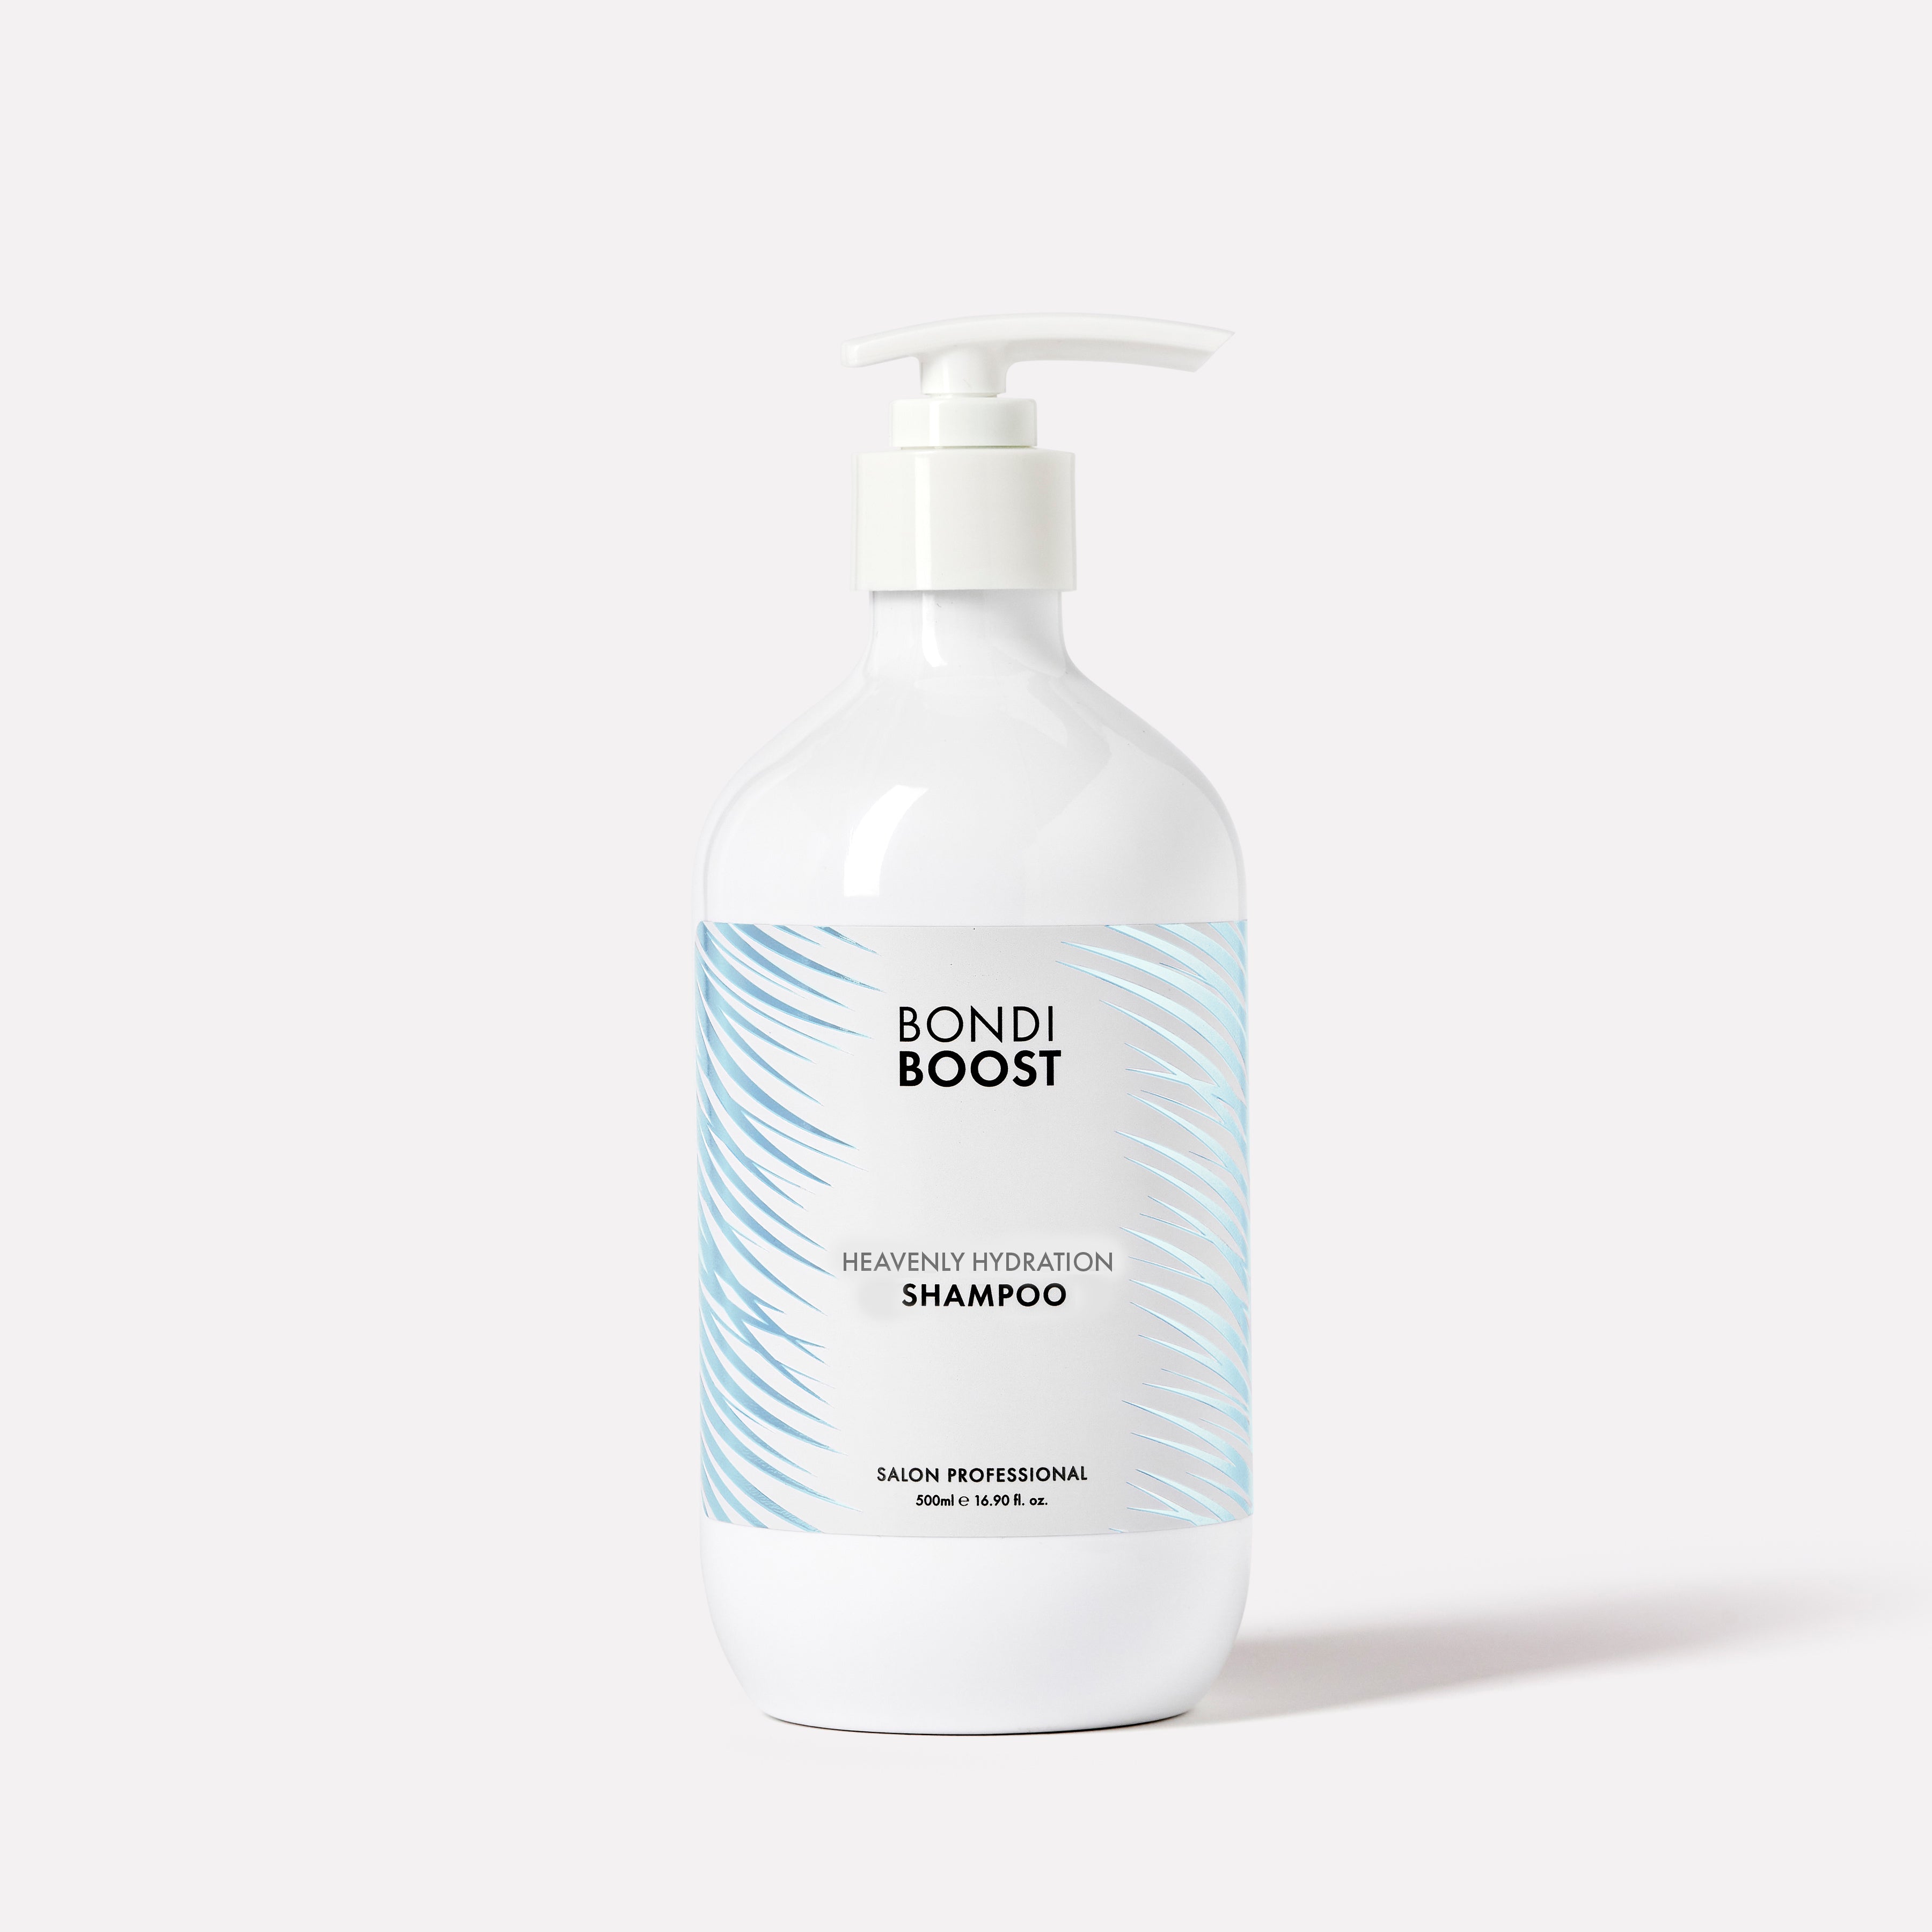 Heavenly Hydration Shampoo - Gently cleanses and hydrates